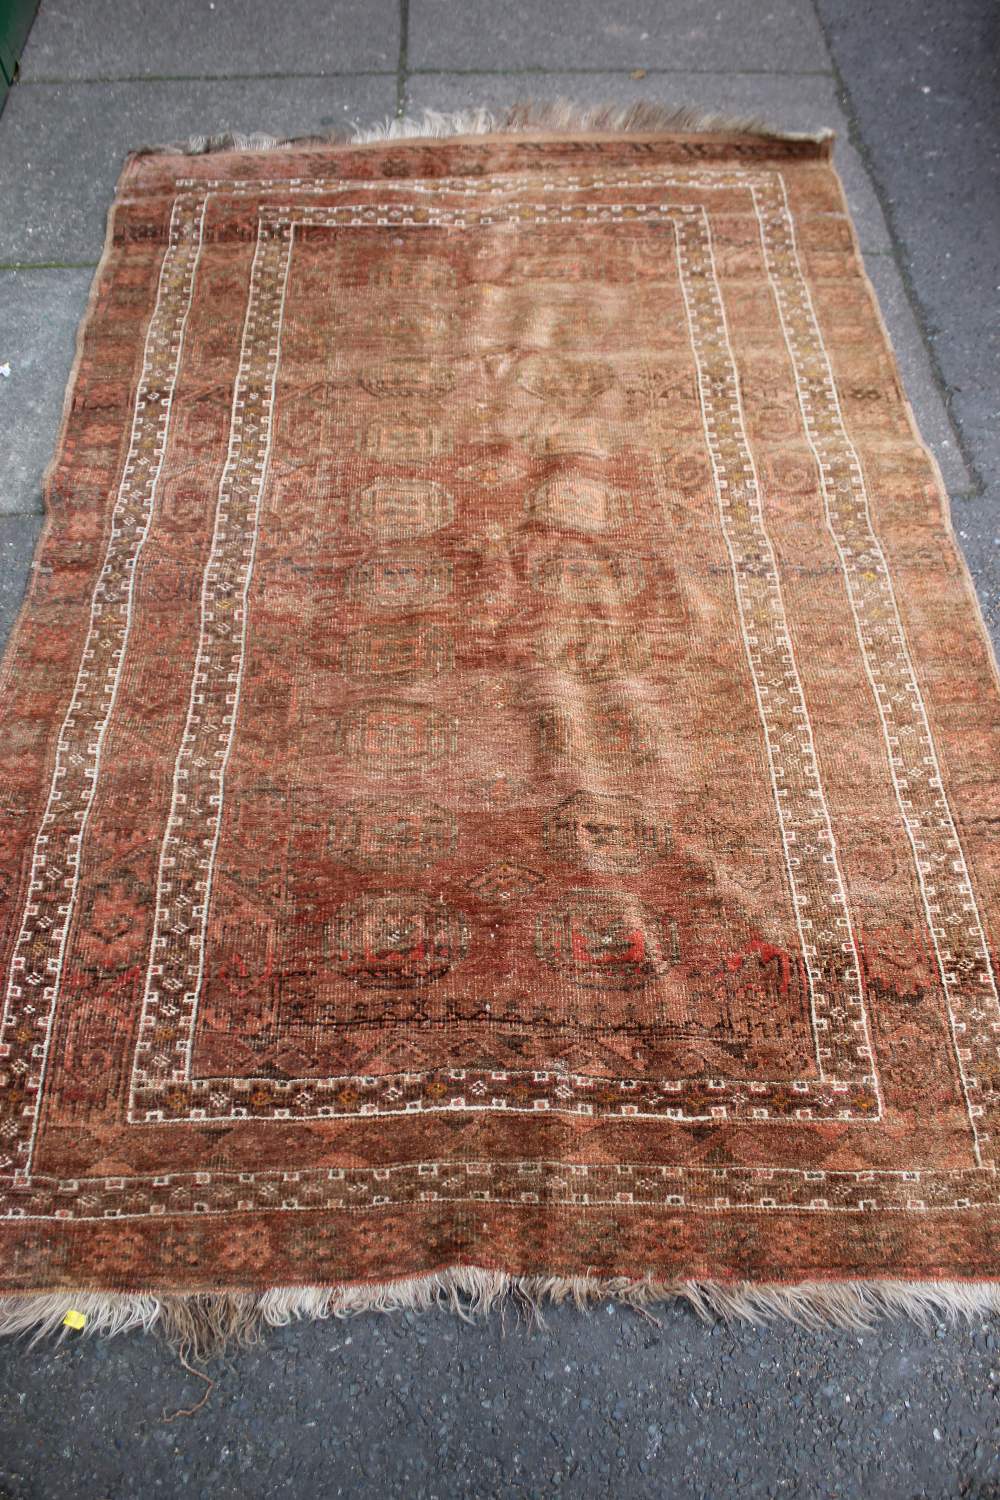 A BOKHARA STYLE WOOLLEN RUG, with an all over pattern on a mainly red ground, 137 x 208 cm - Faded - Image 2 of 6